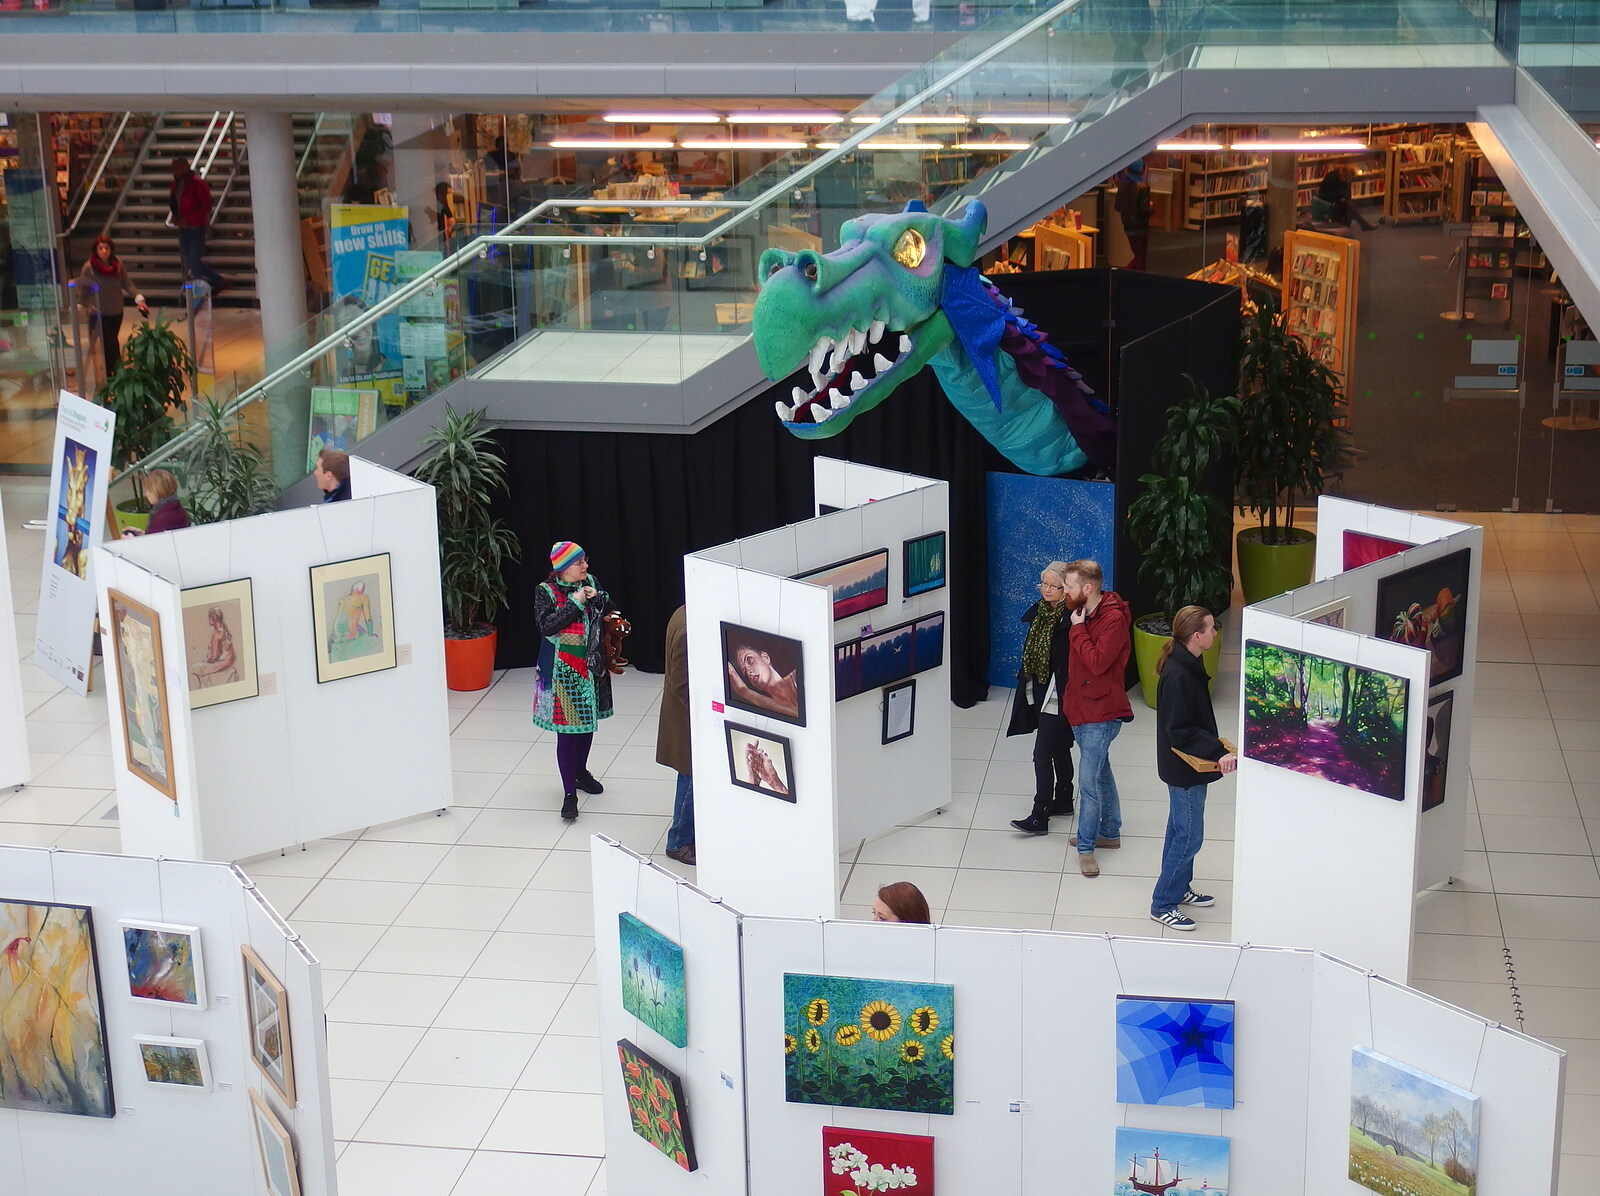 An art exhibition from A Dragoney Sort of Day, Norwich, Norfolk - 15th February 2014